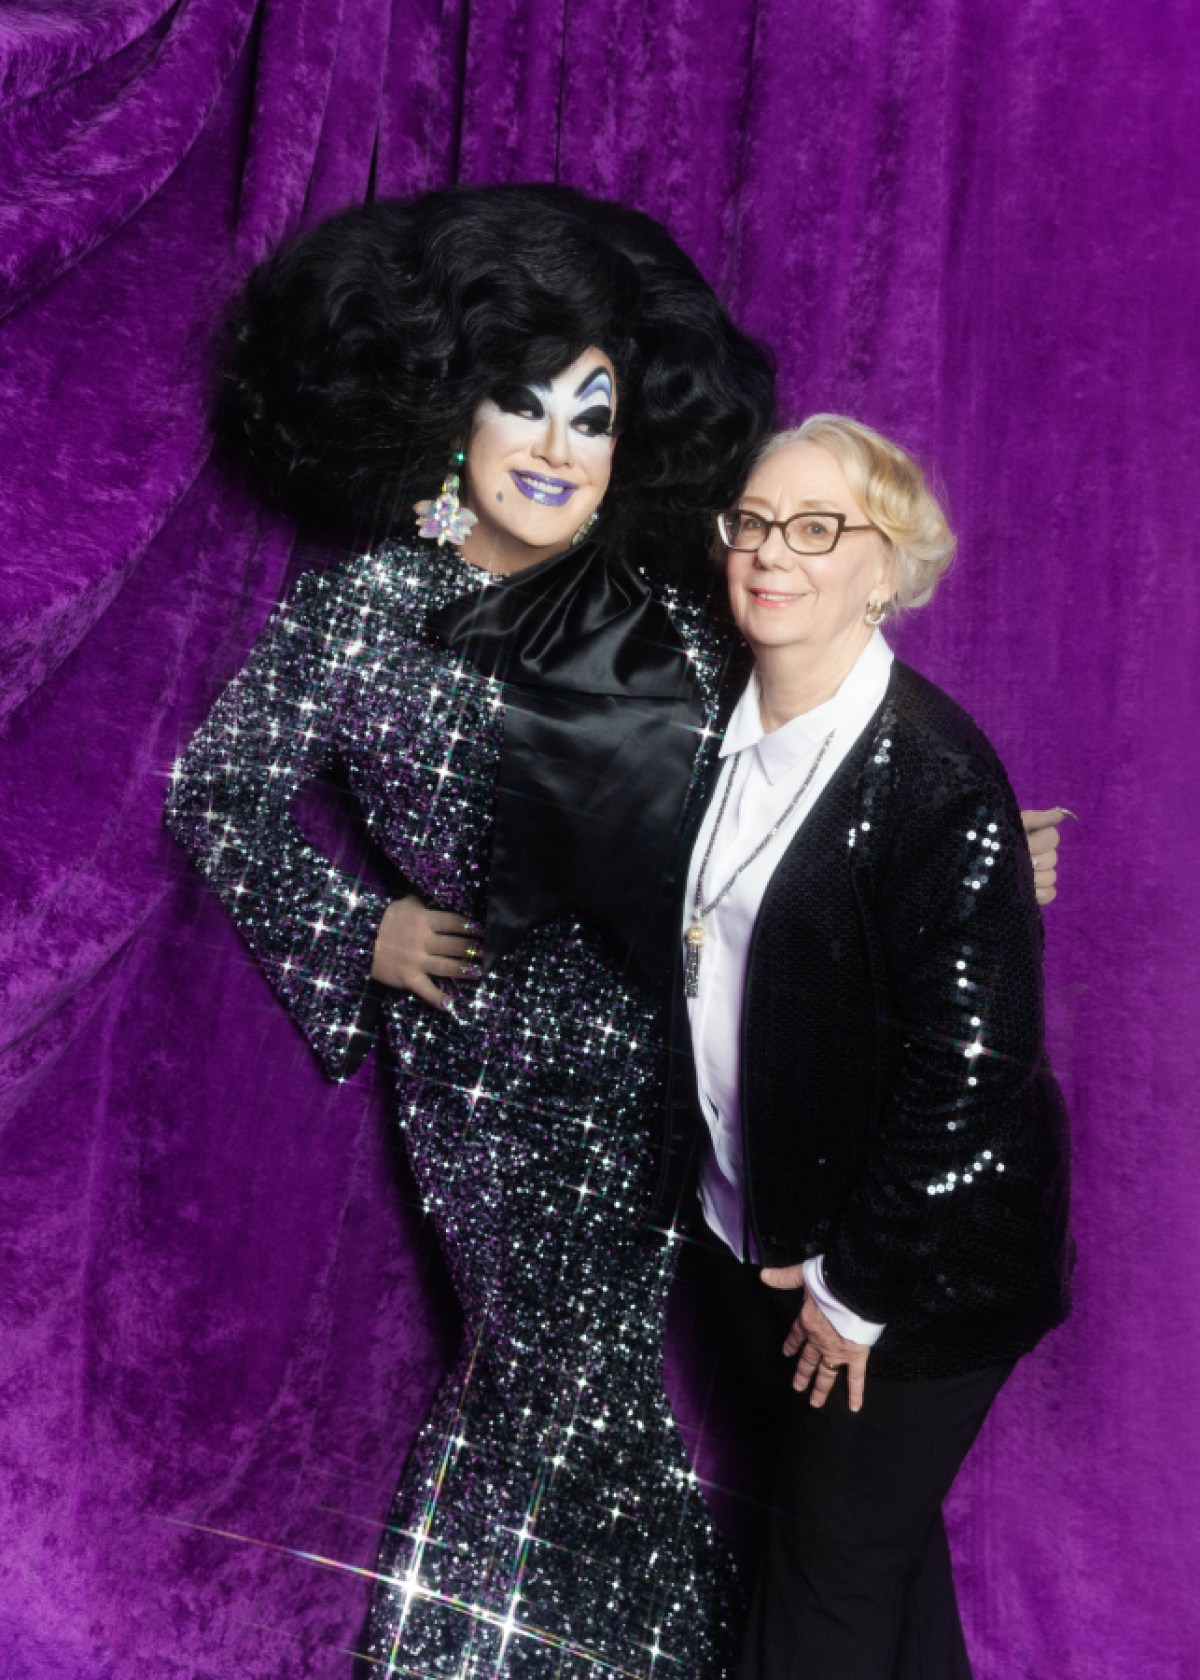 Peaches Christ Mink Stole pose in front of a purple backdrop, Peaches is in sparkly black dress, Mink is in a sparkly black suit